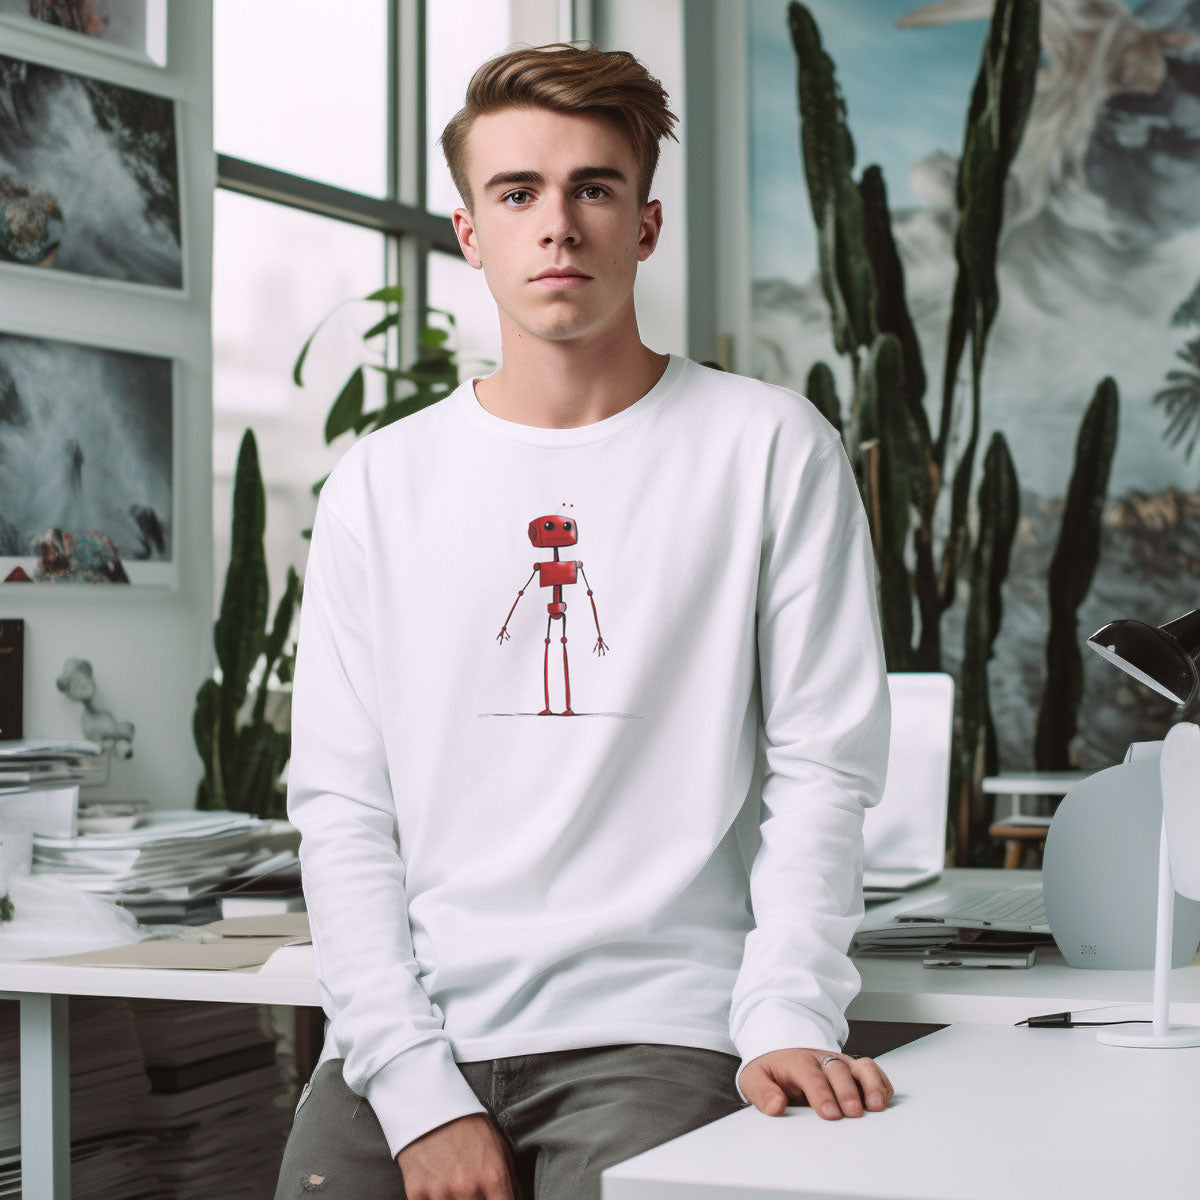 Guy in an office wearing a white long sleeve t-shirt with a red robot print